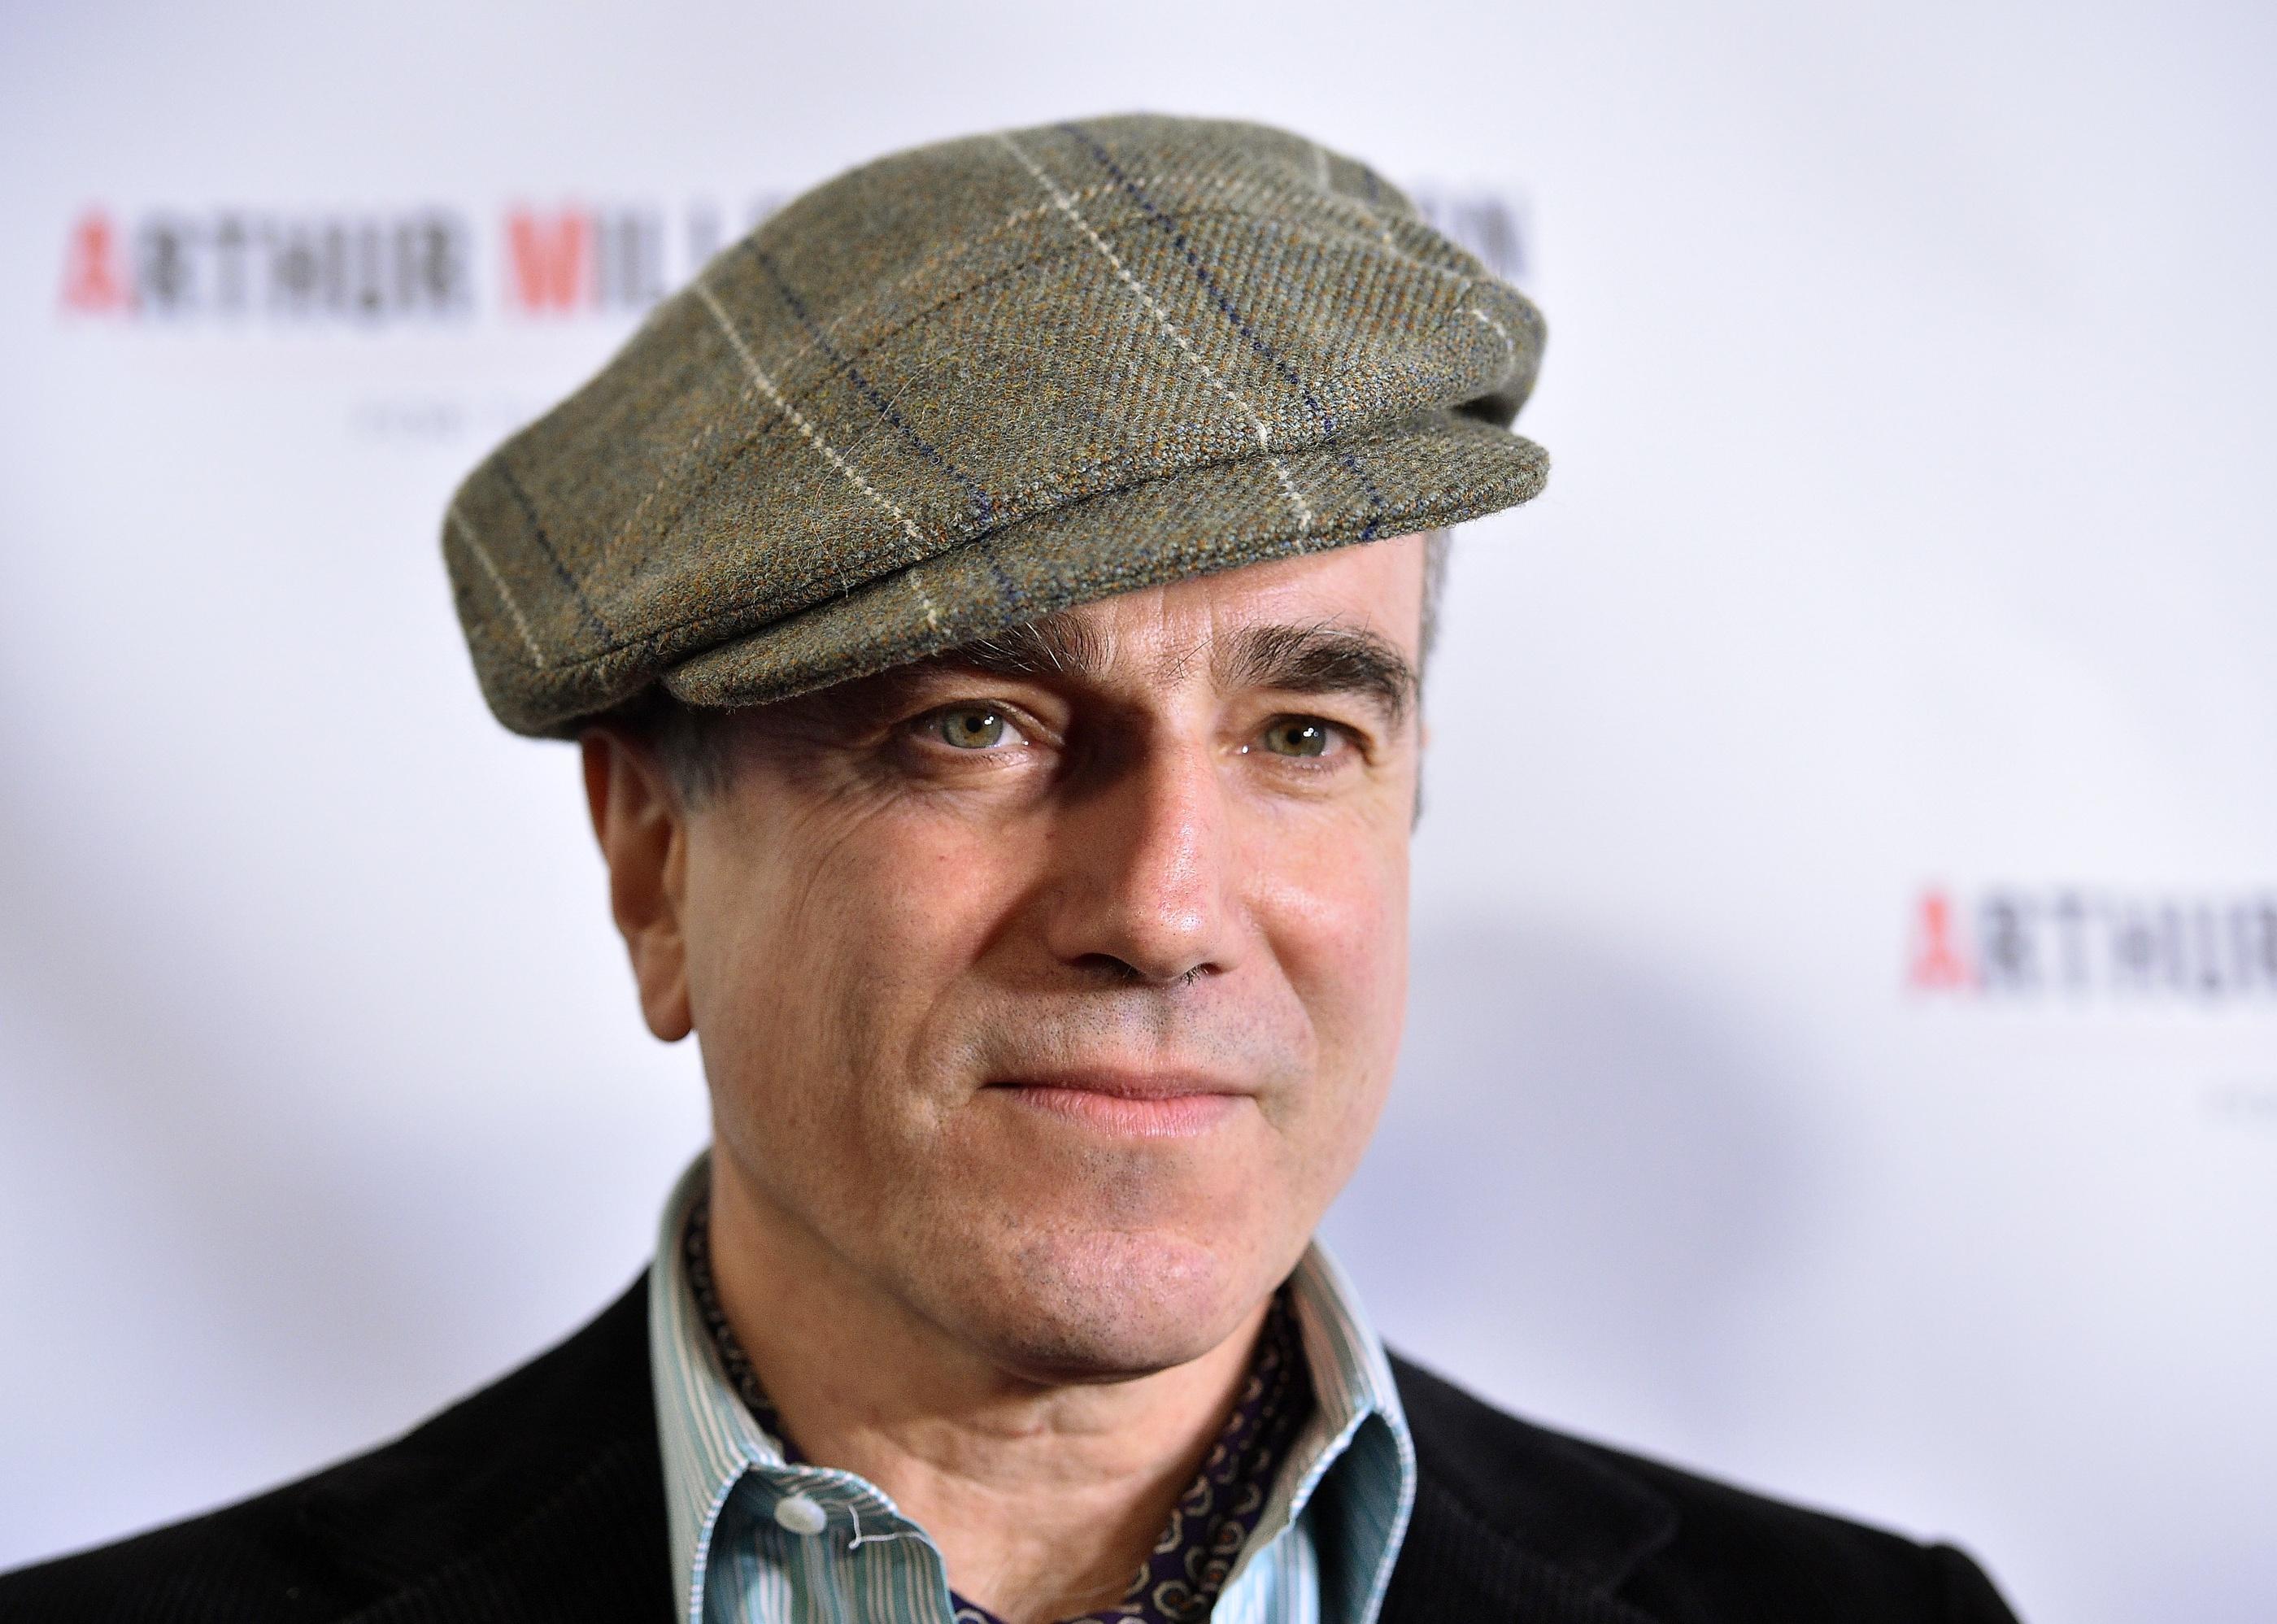 Daniel Day-Lewis in a black blazer and plaid donegal hat.